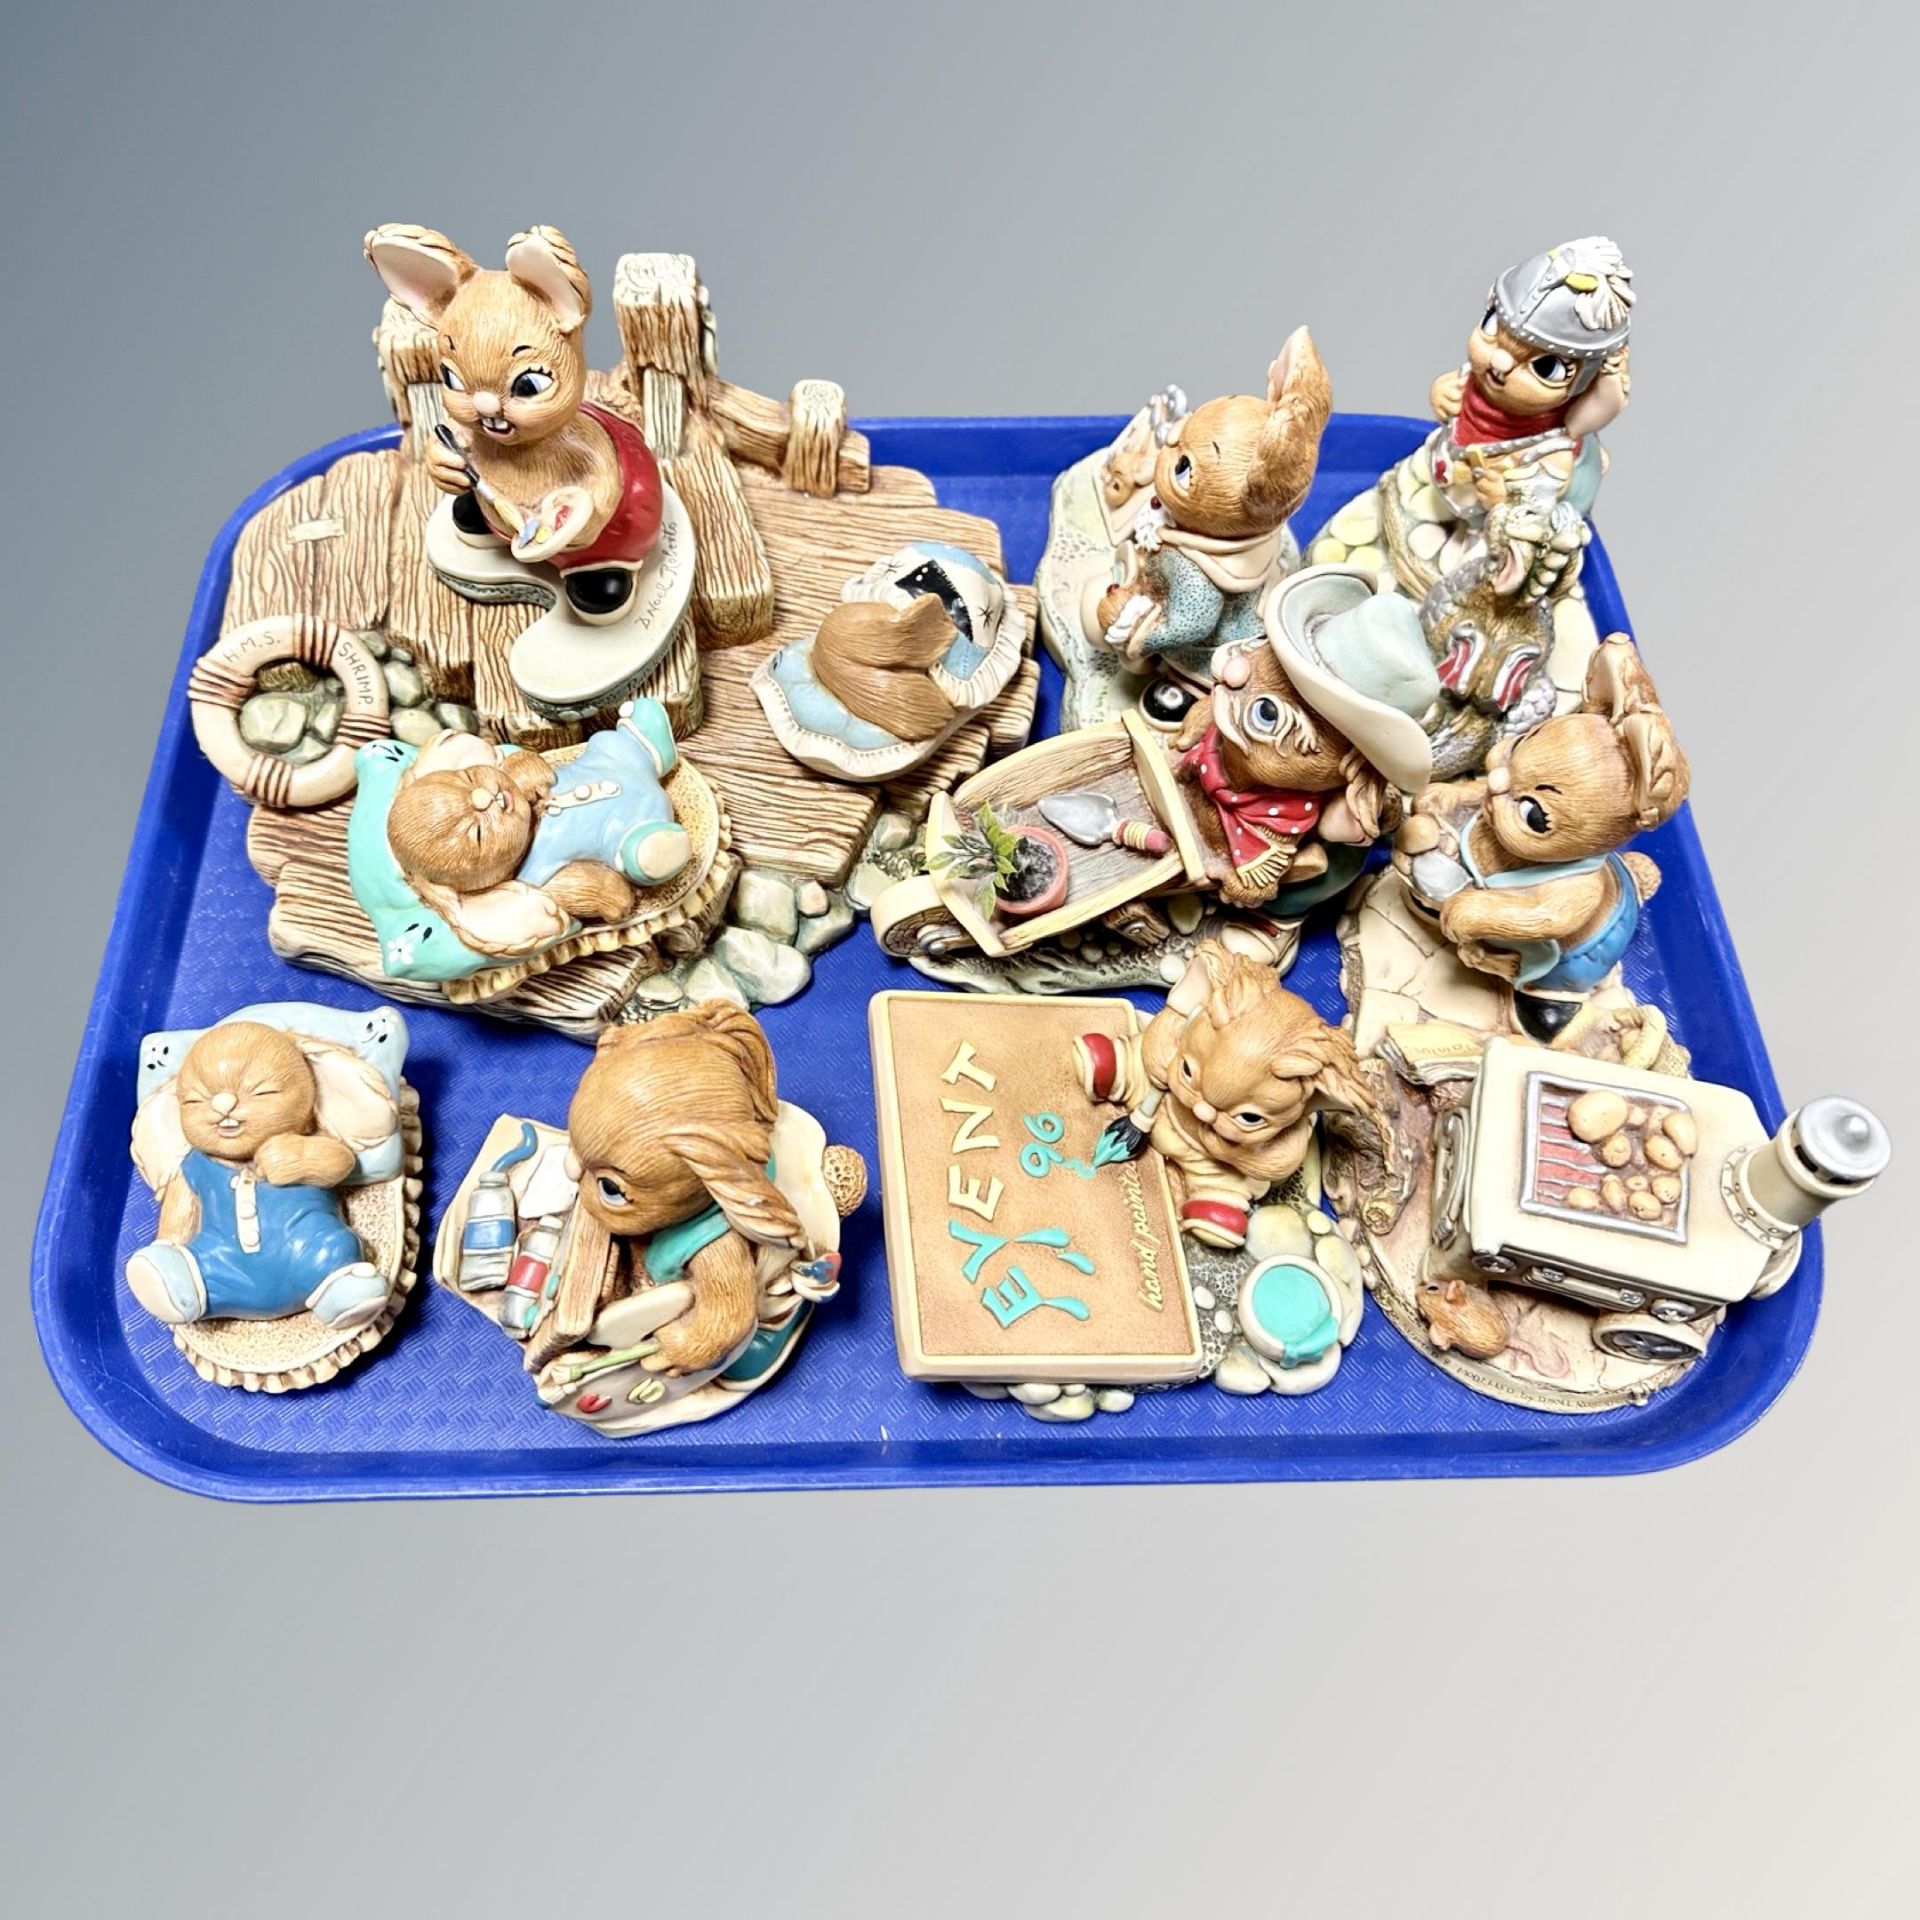 A tray of ten Pendelfin figures - Event figures, George and the Dragon Spud,